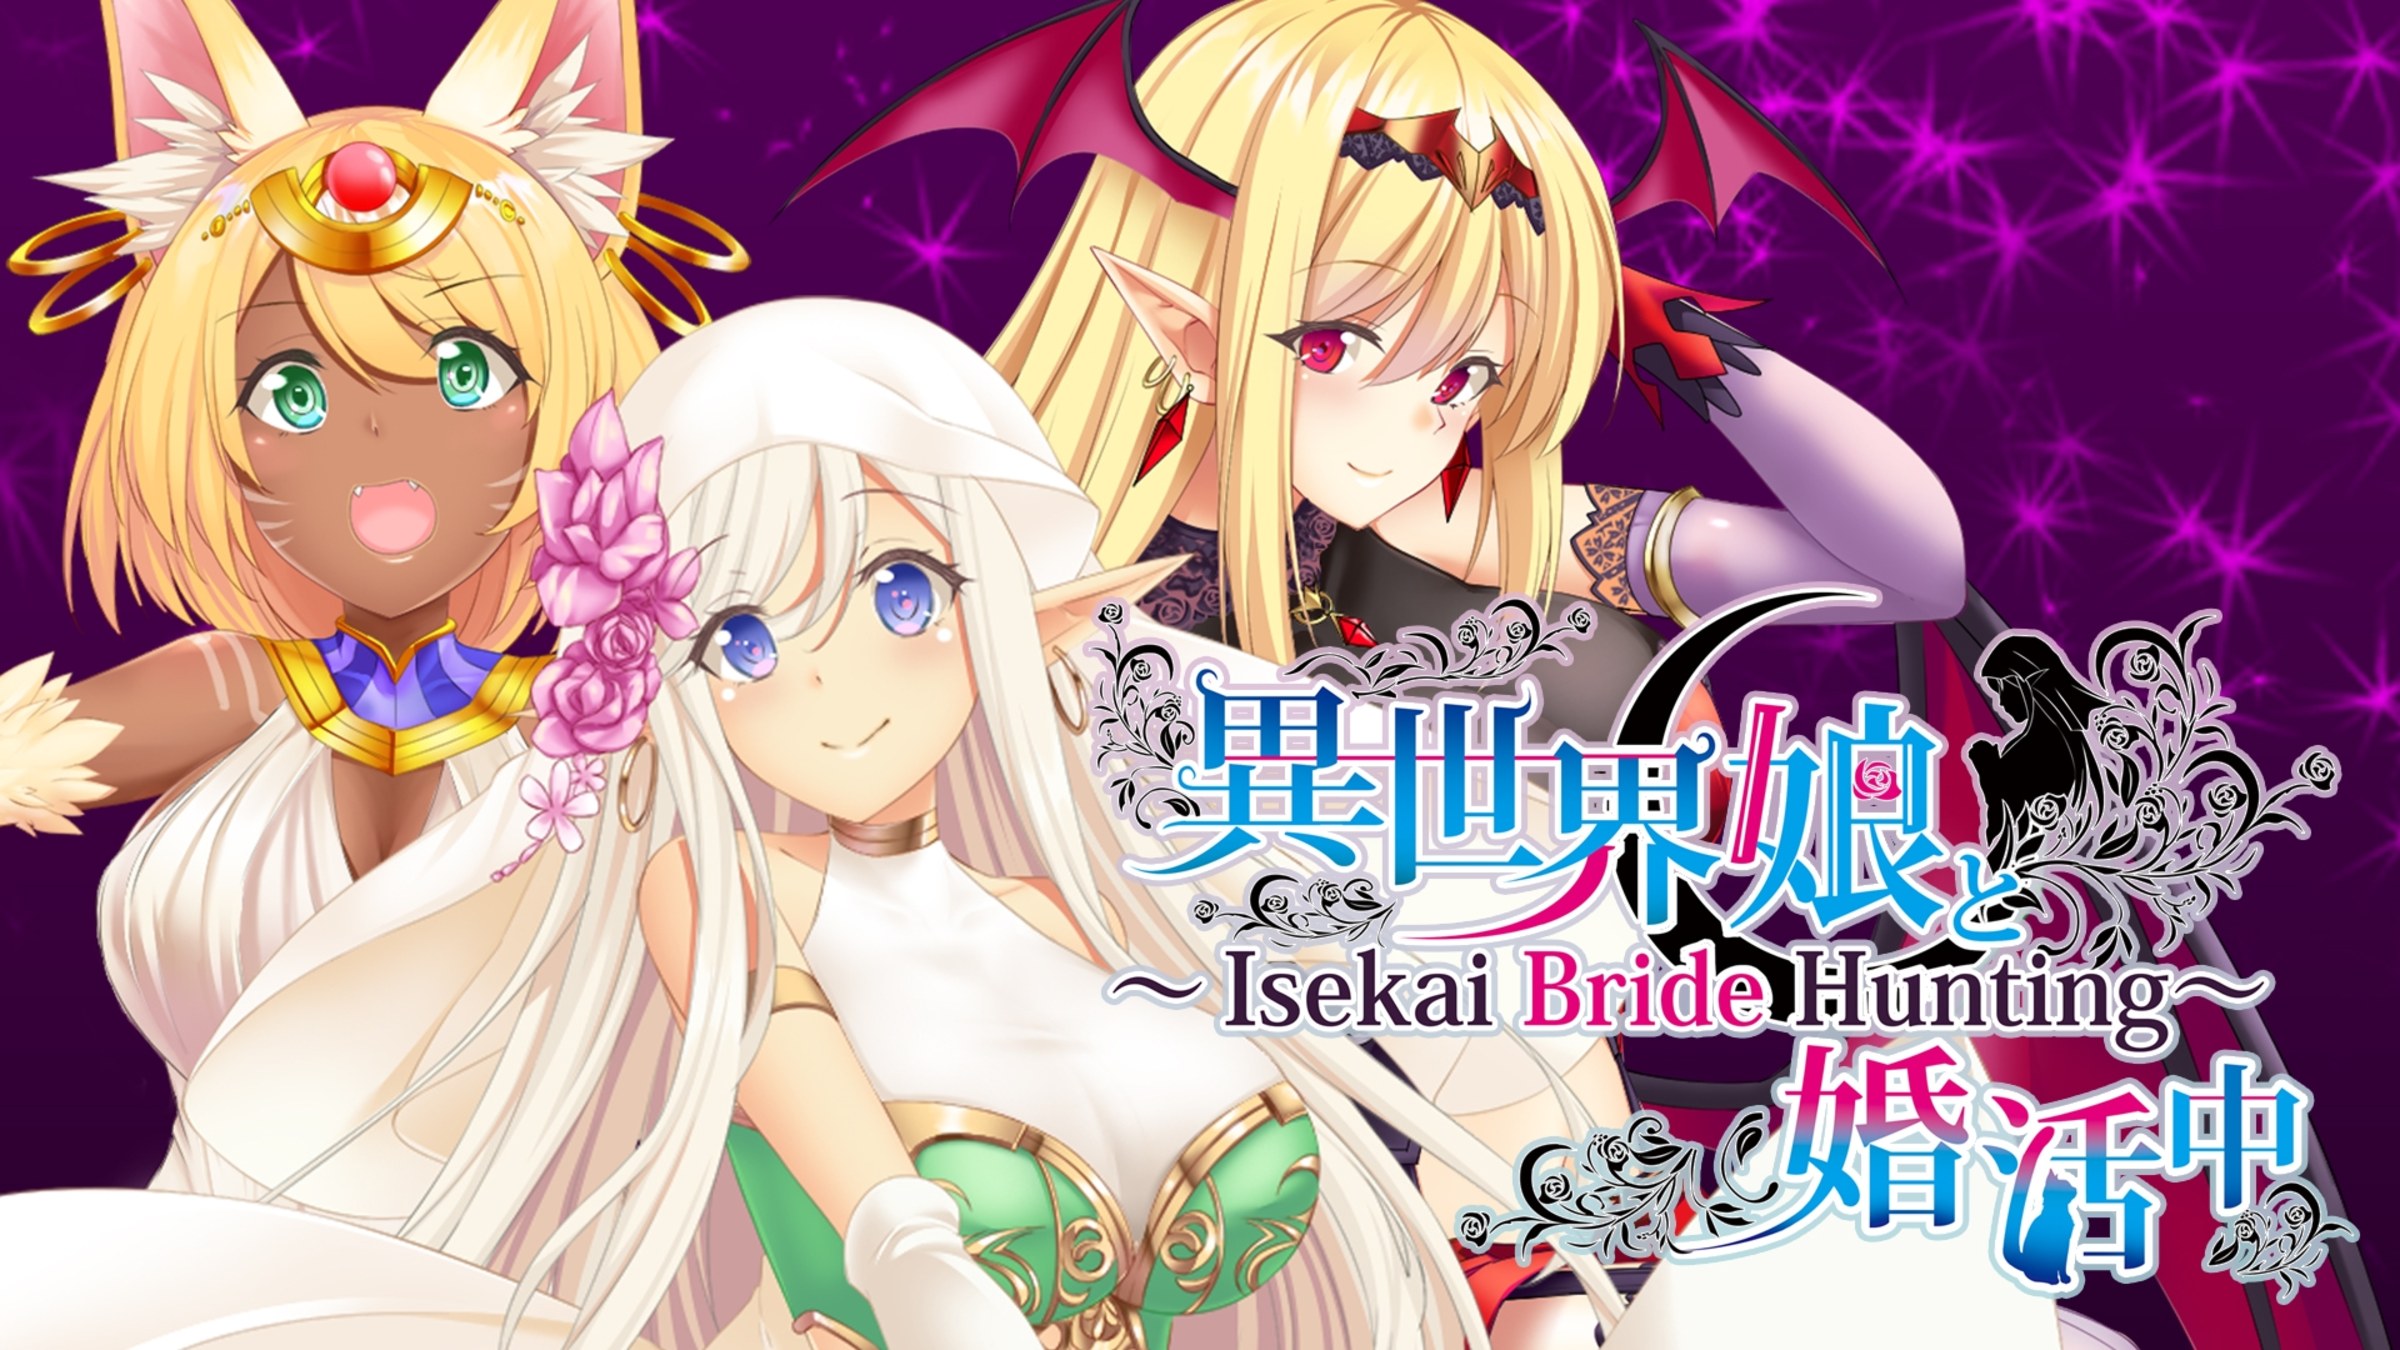 Isekai Bride Hunting For Nintendo Switch Nintendo Official Site